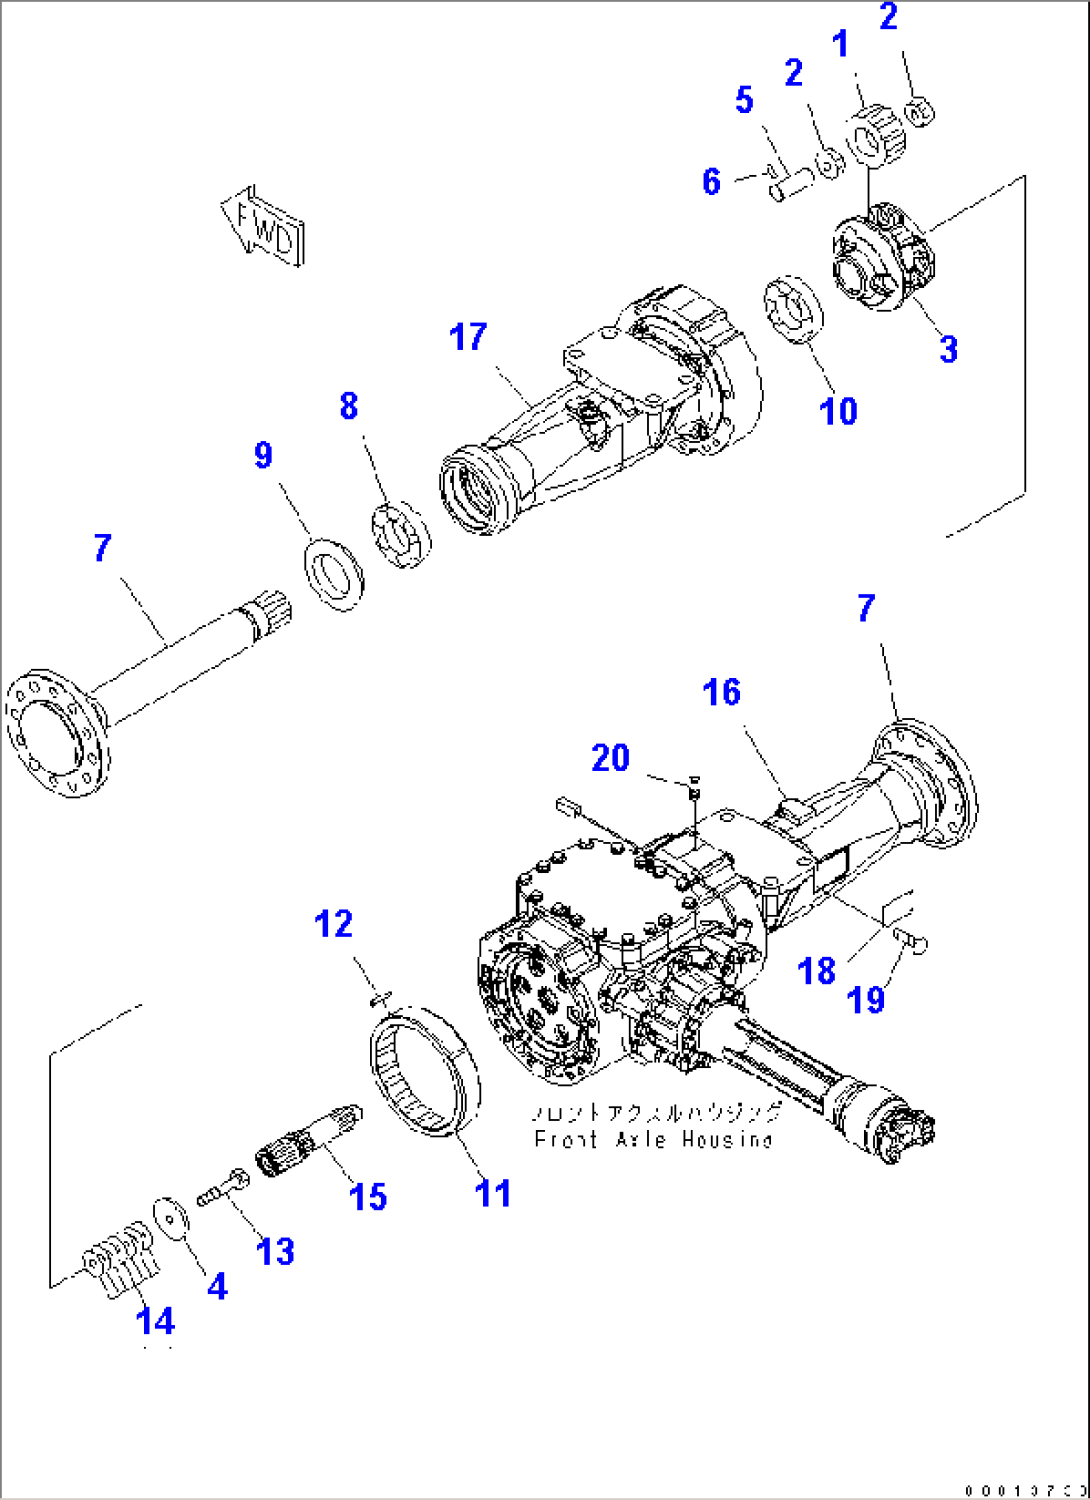 FRONT AXLE (FINAL DRIVE AND HOUSING)